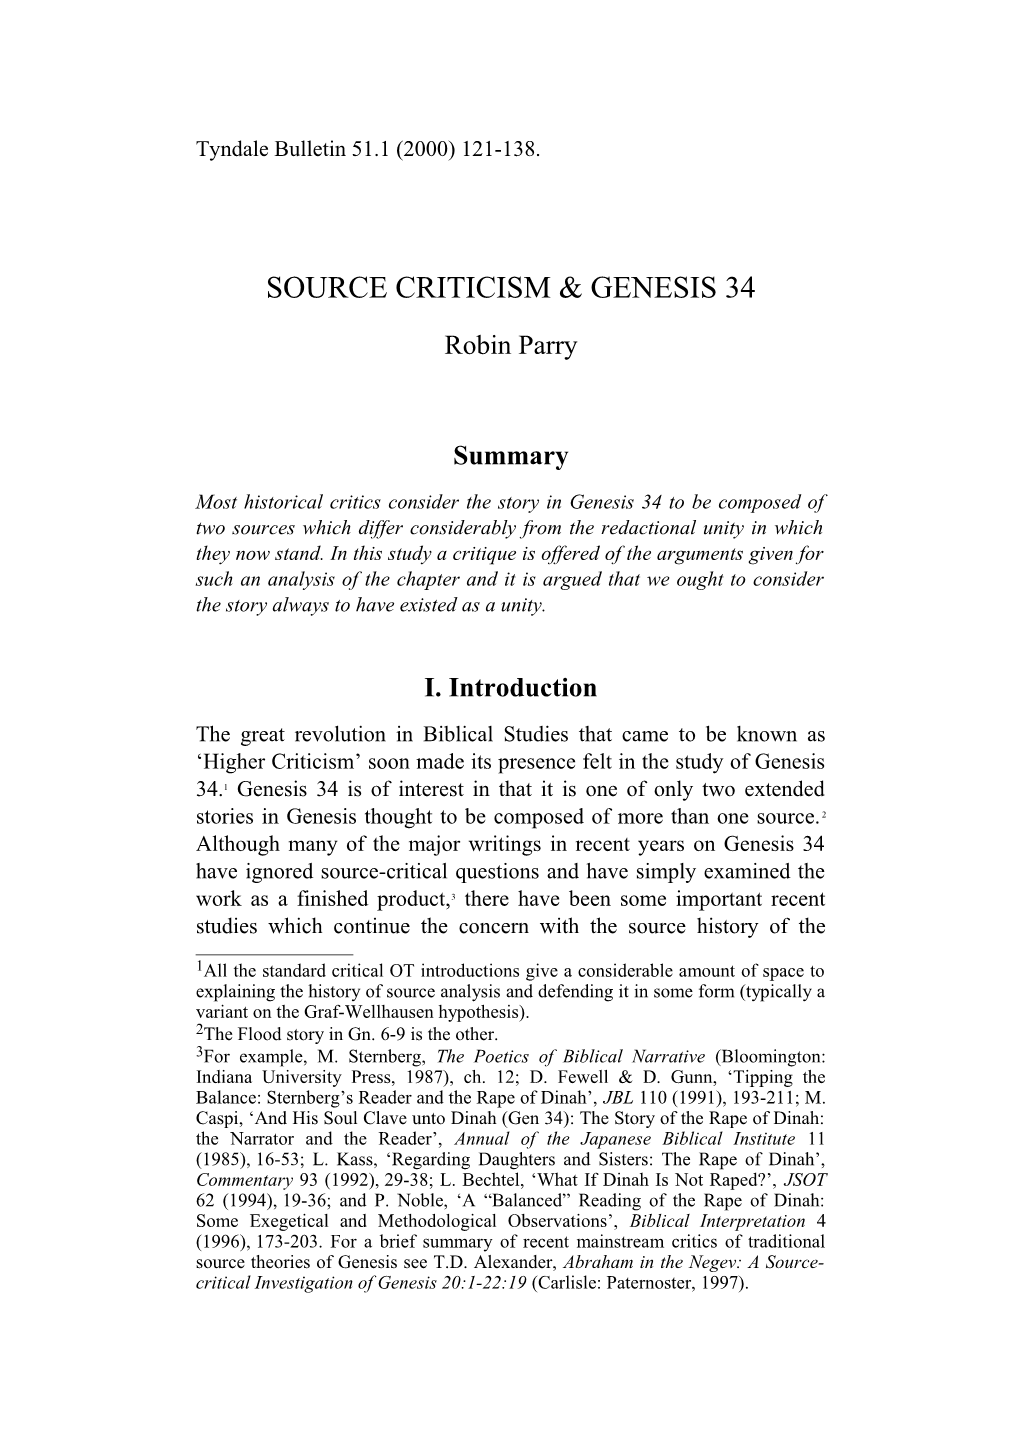 Source Criticism and Genesis 34